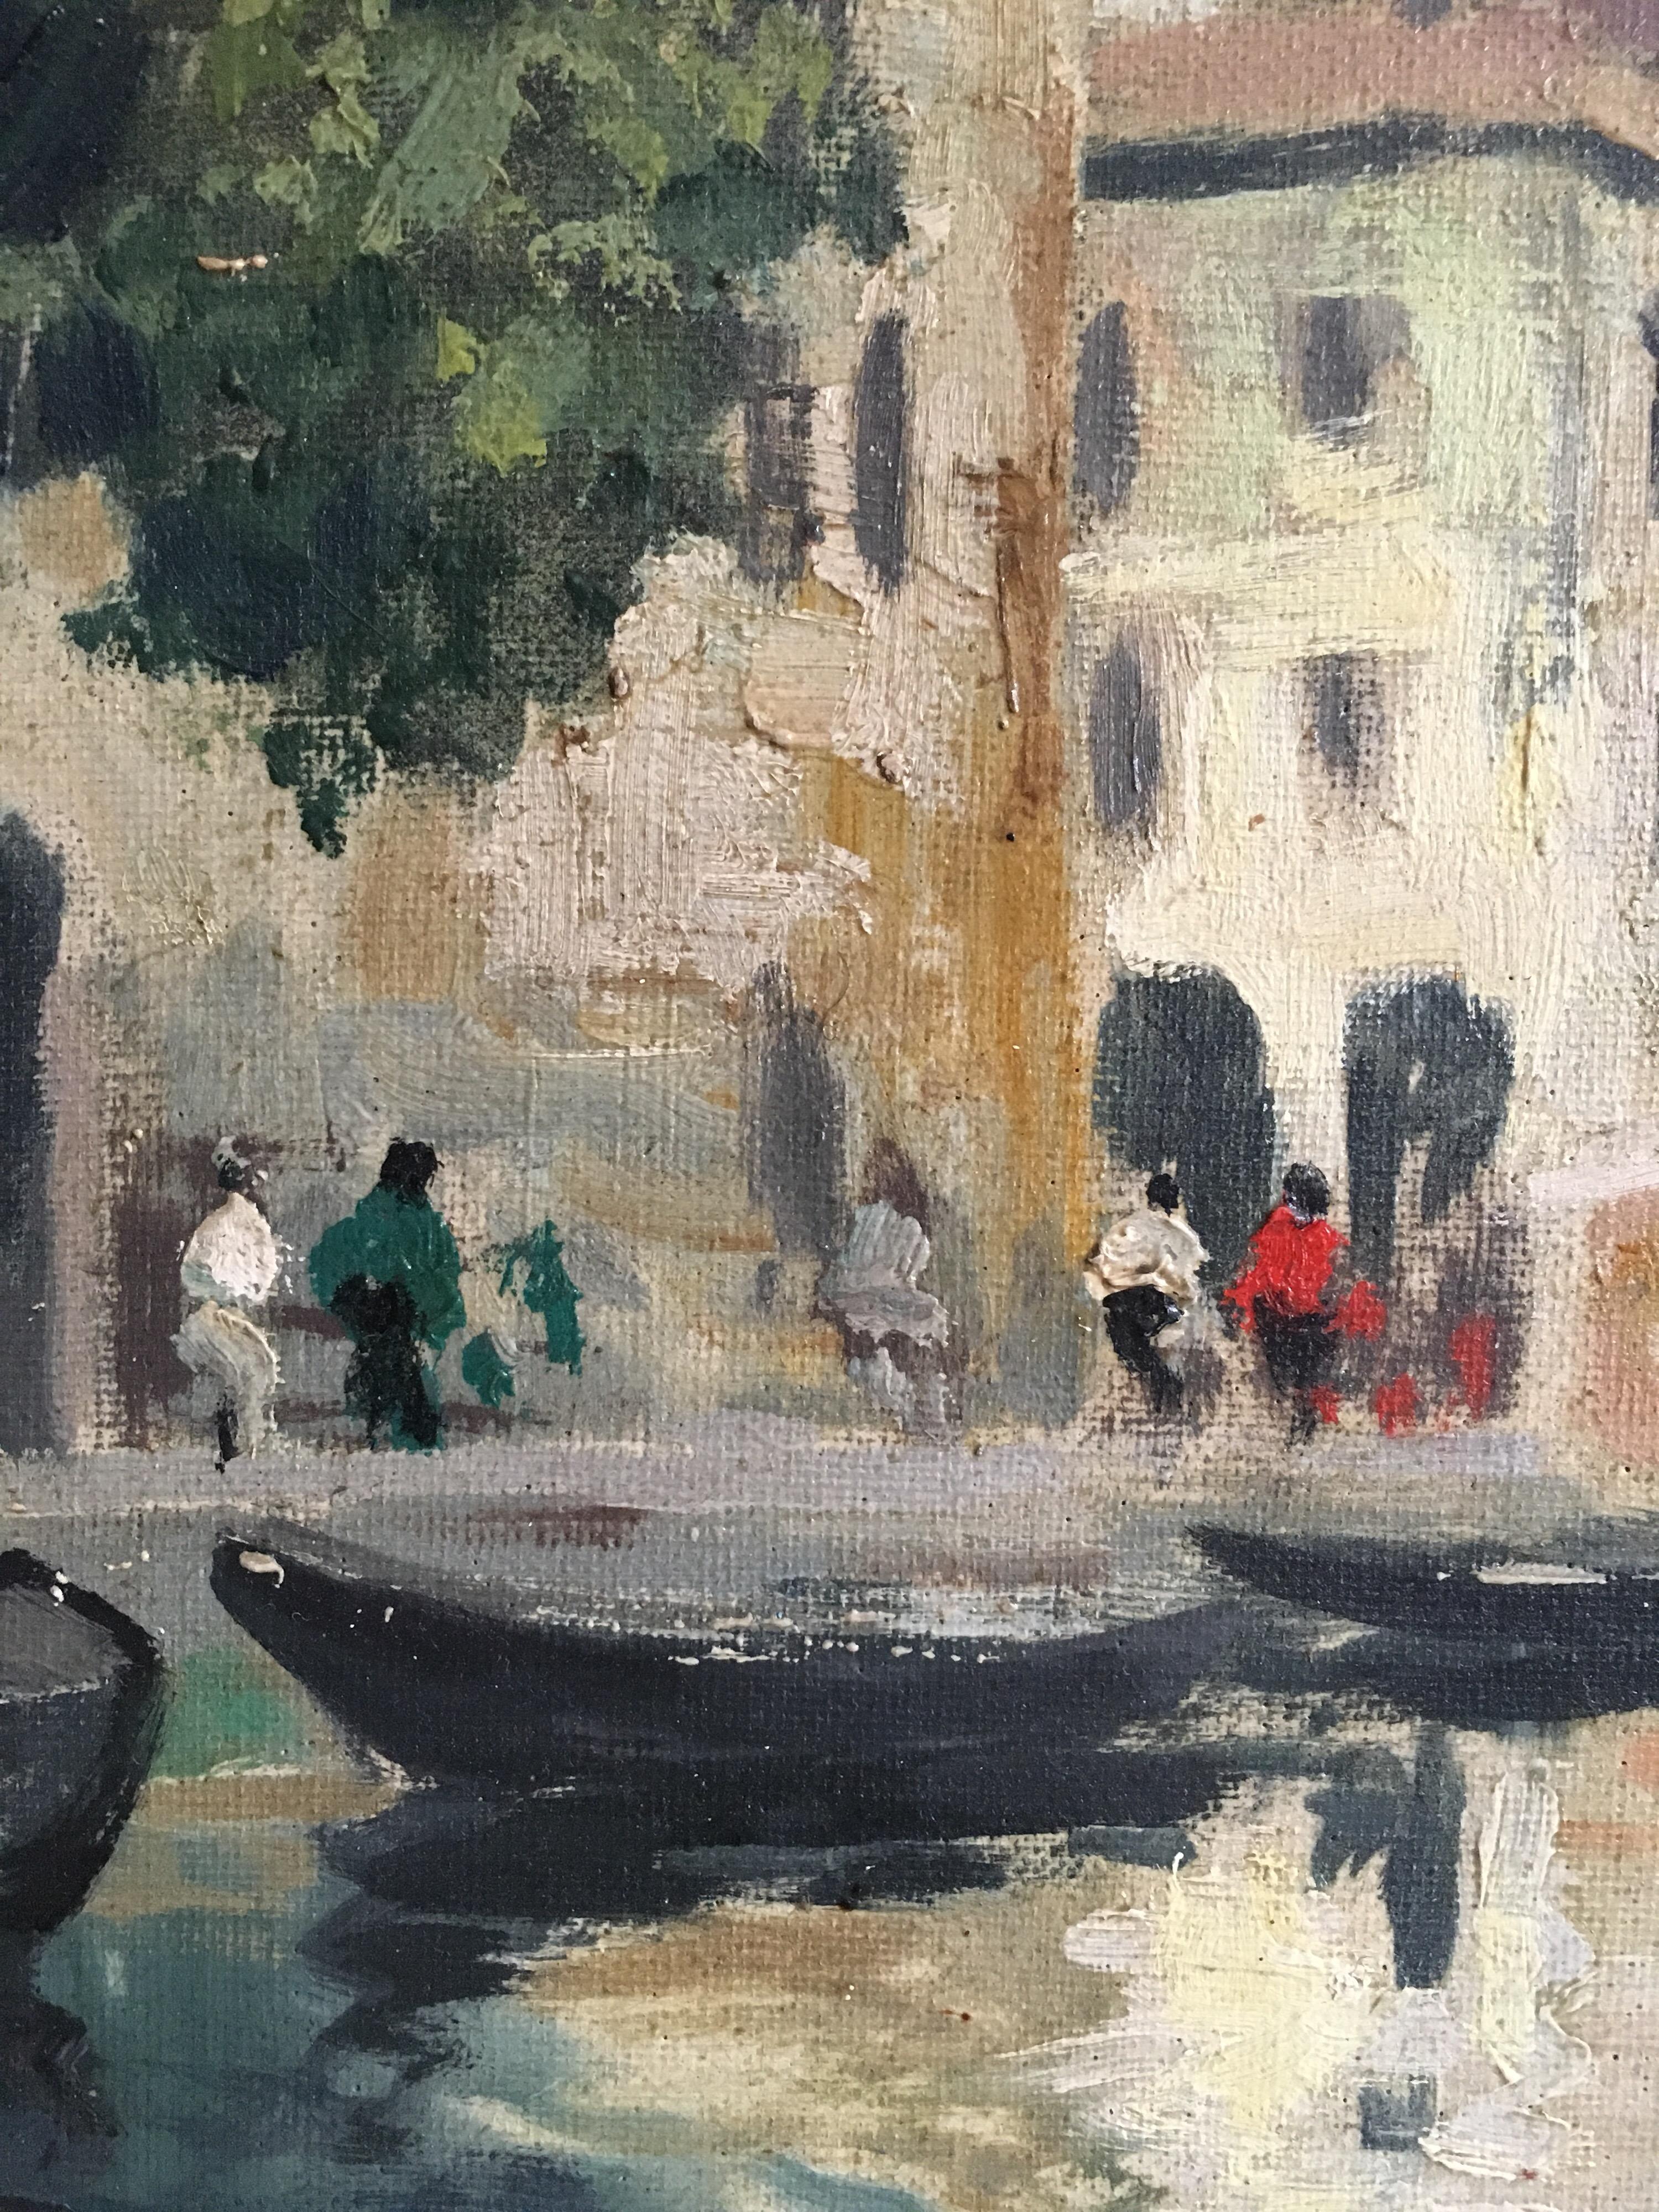 Venice Canal, Impressionist Oil Painting  - Beige Figurative Painting by British Impressionist